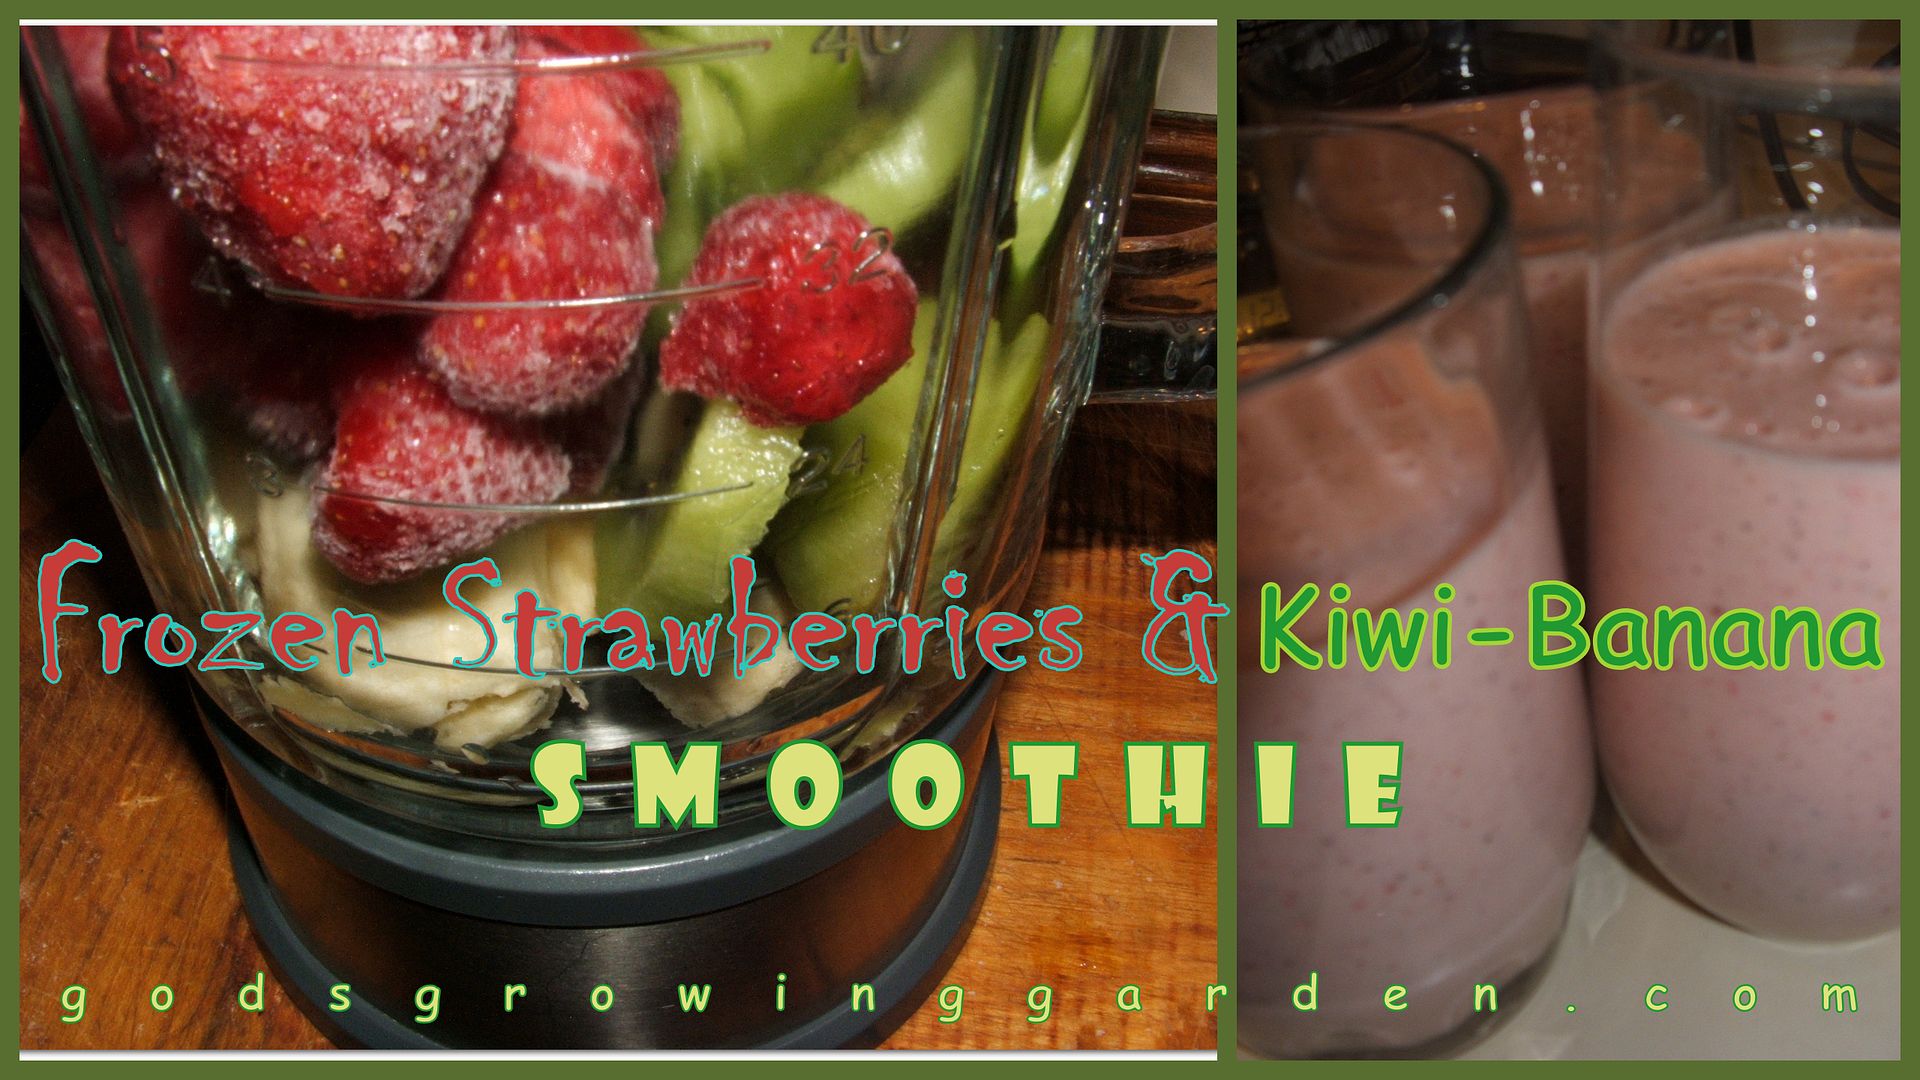 Frozen Strawberry & Kiwi-Banana Smoothie by Angie Ouellette-Tower photo 2014-01-23_zps47aeac33.jpg